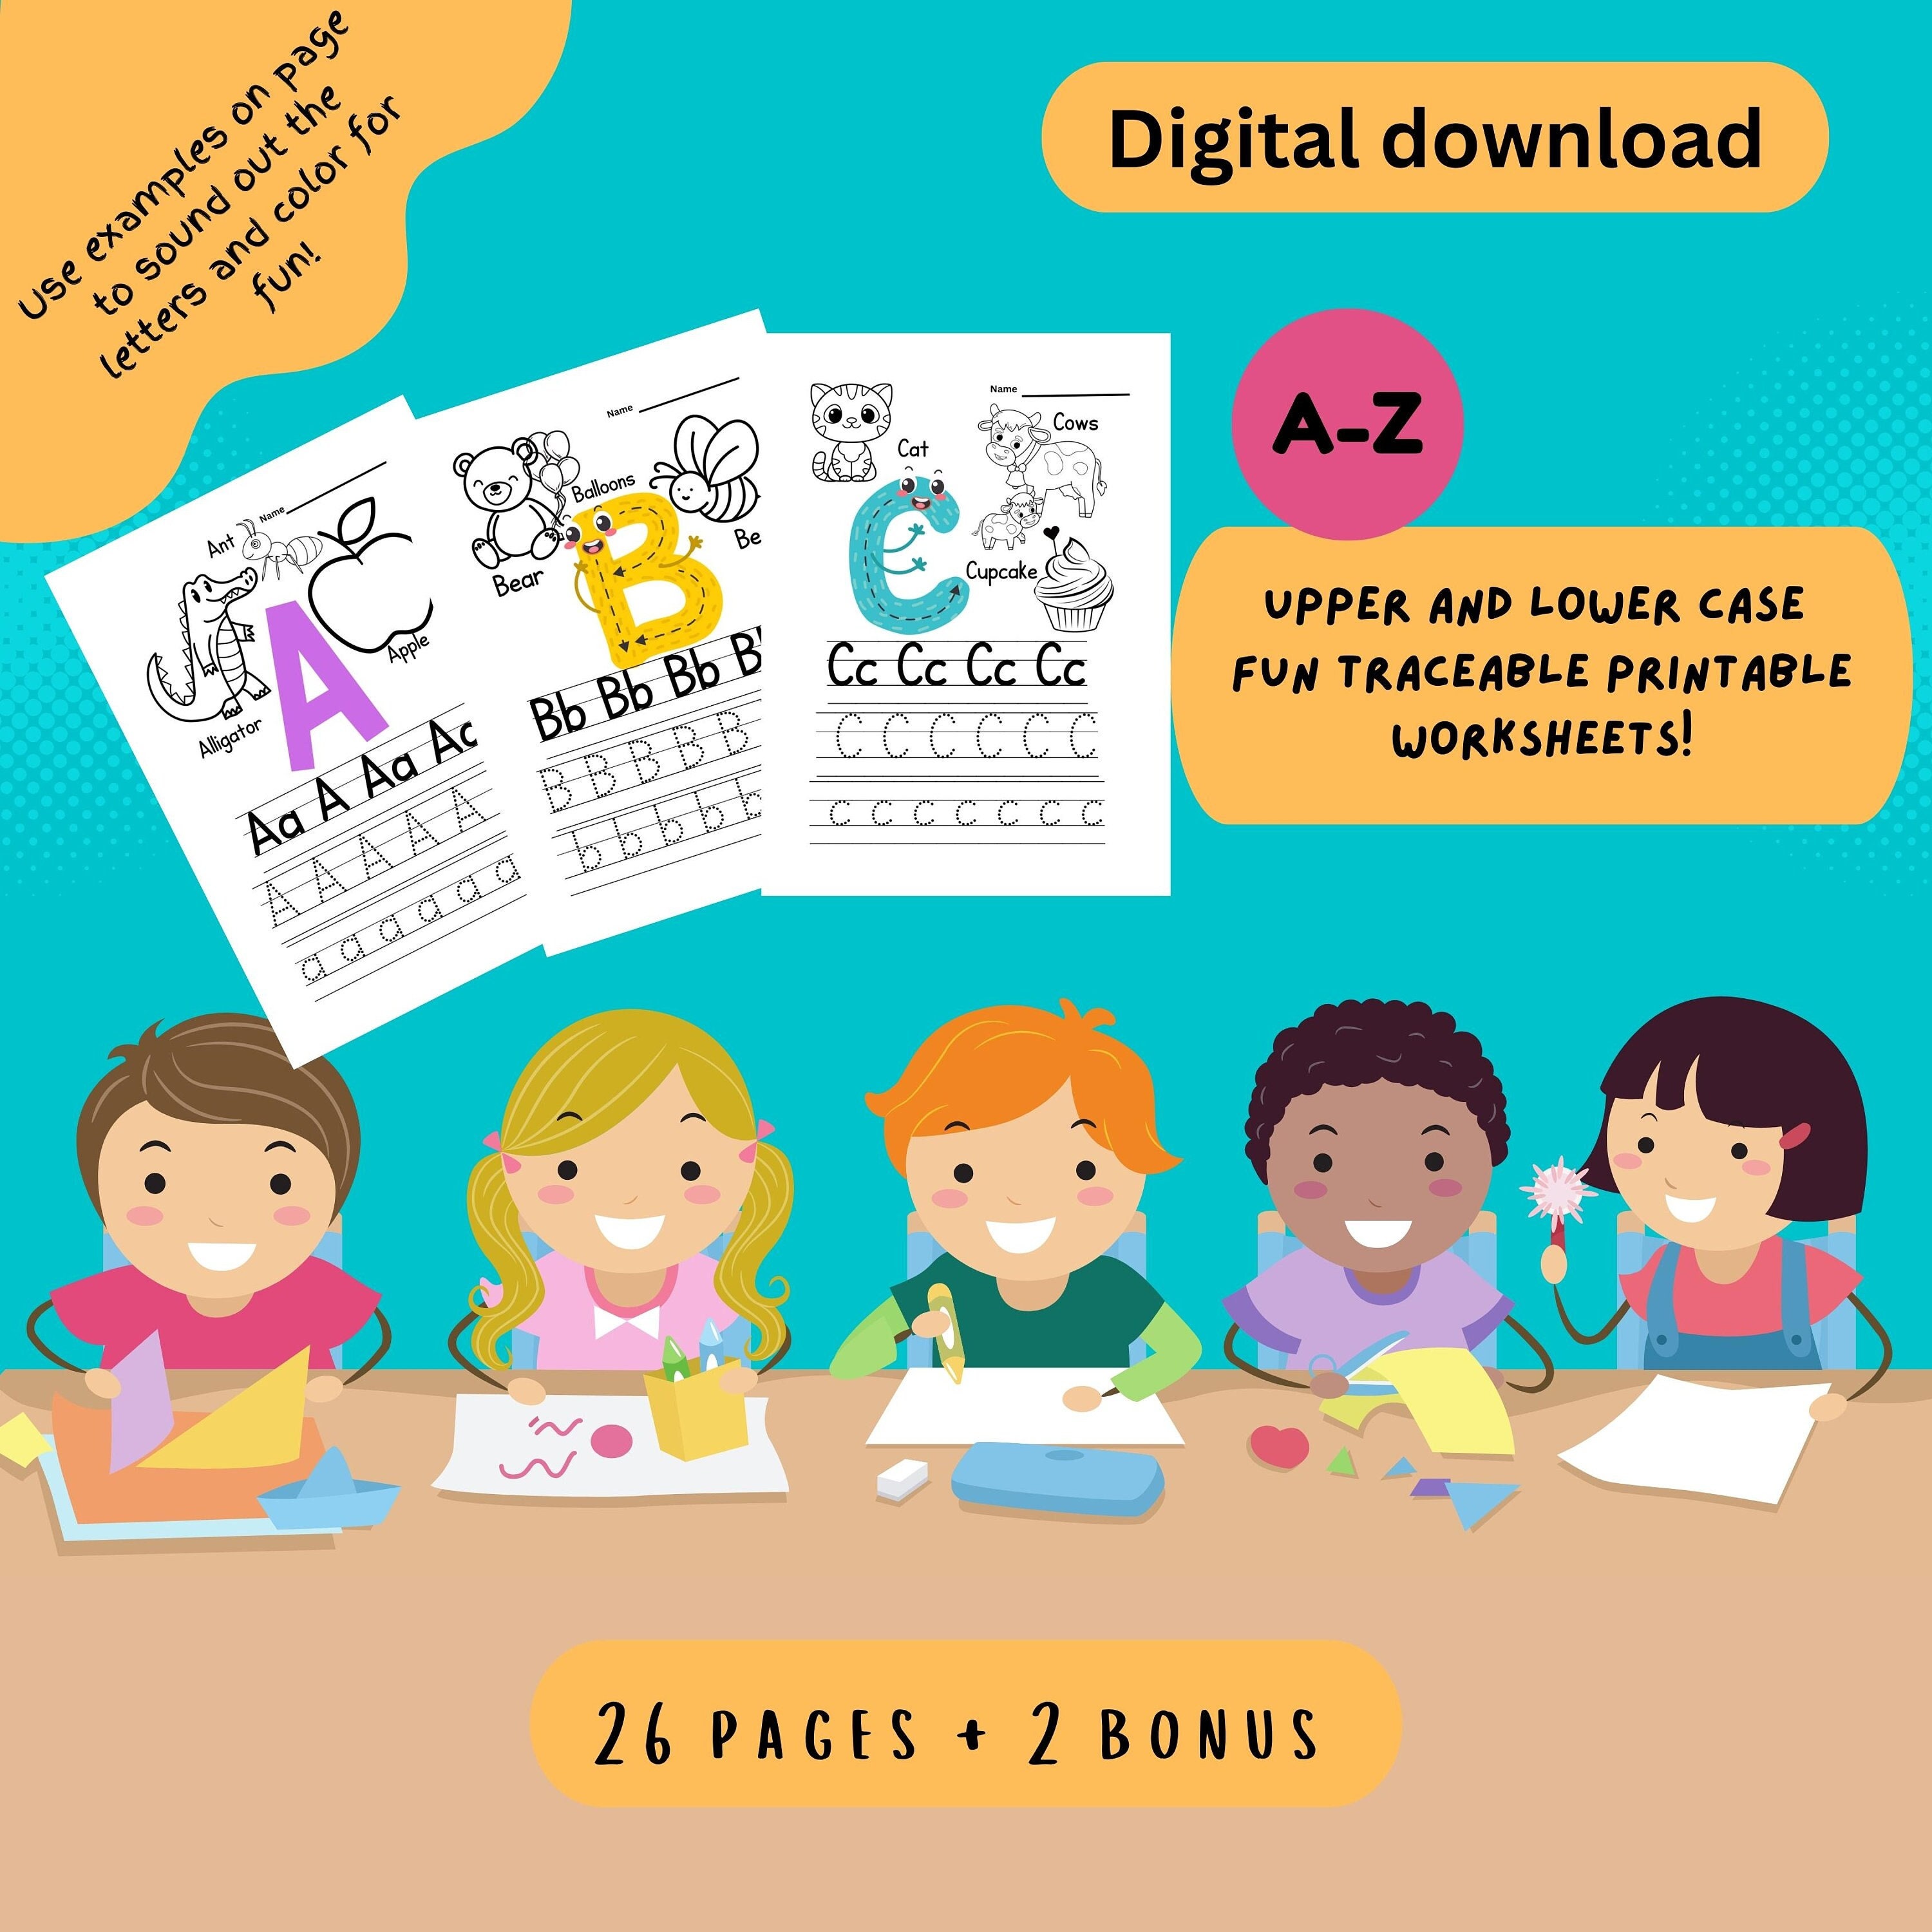 Color By Numbers For Kids Ages 8-12: Children's Activity Book, Large Print  Coloring Pages, Suitable For Boys and Girls, Multiple Themes Including  , Helps Improves Child's Creativity Skills by RR Publishing